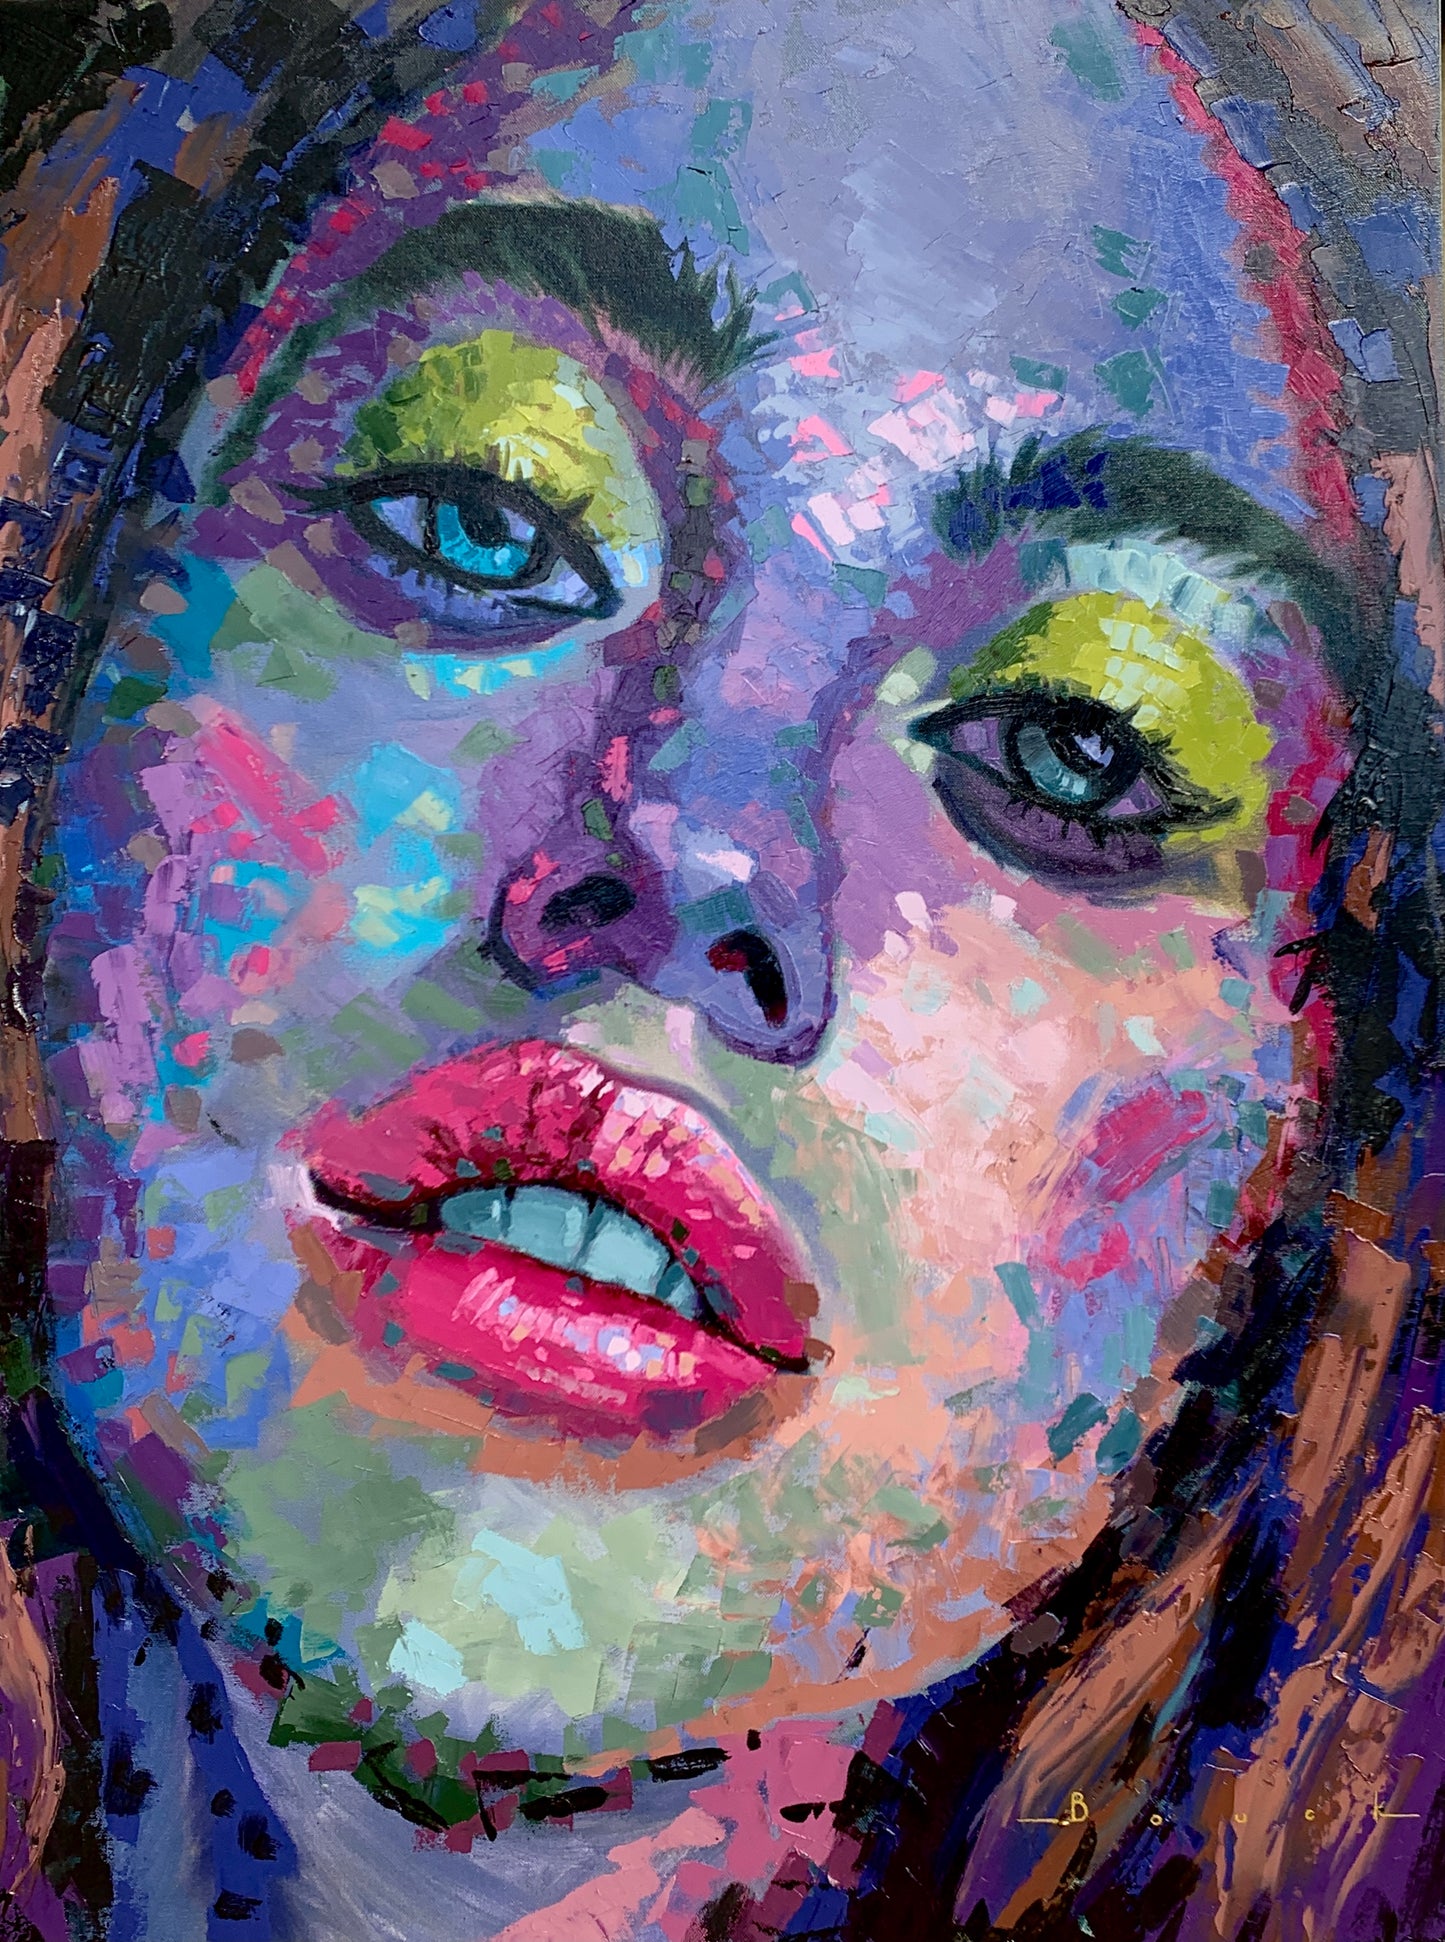 A close-up portrait of a beautiful woman with bright lipstick and green eyeshadow in a purple color scheme.